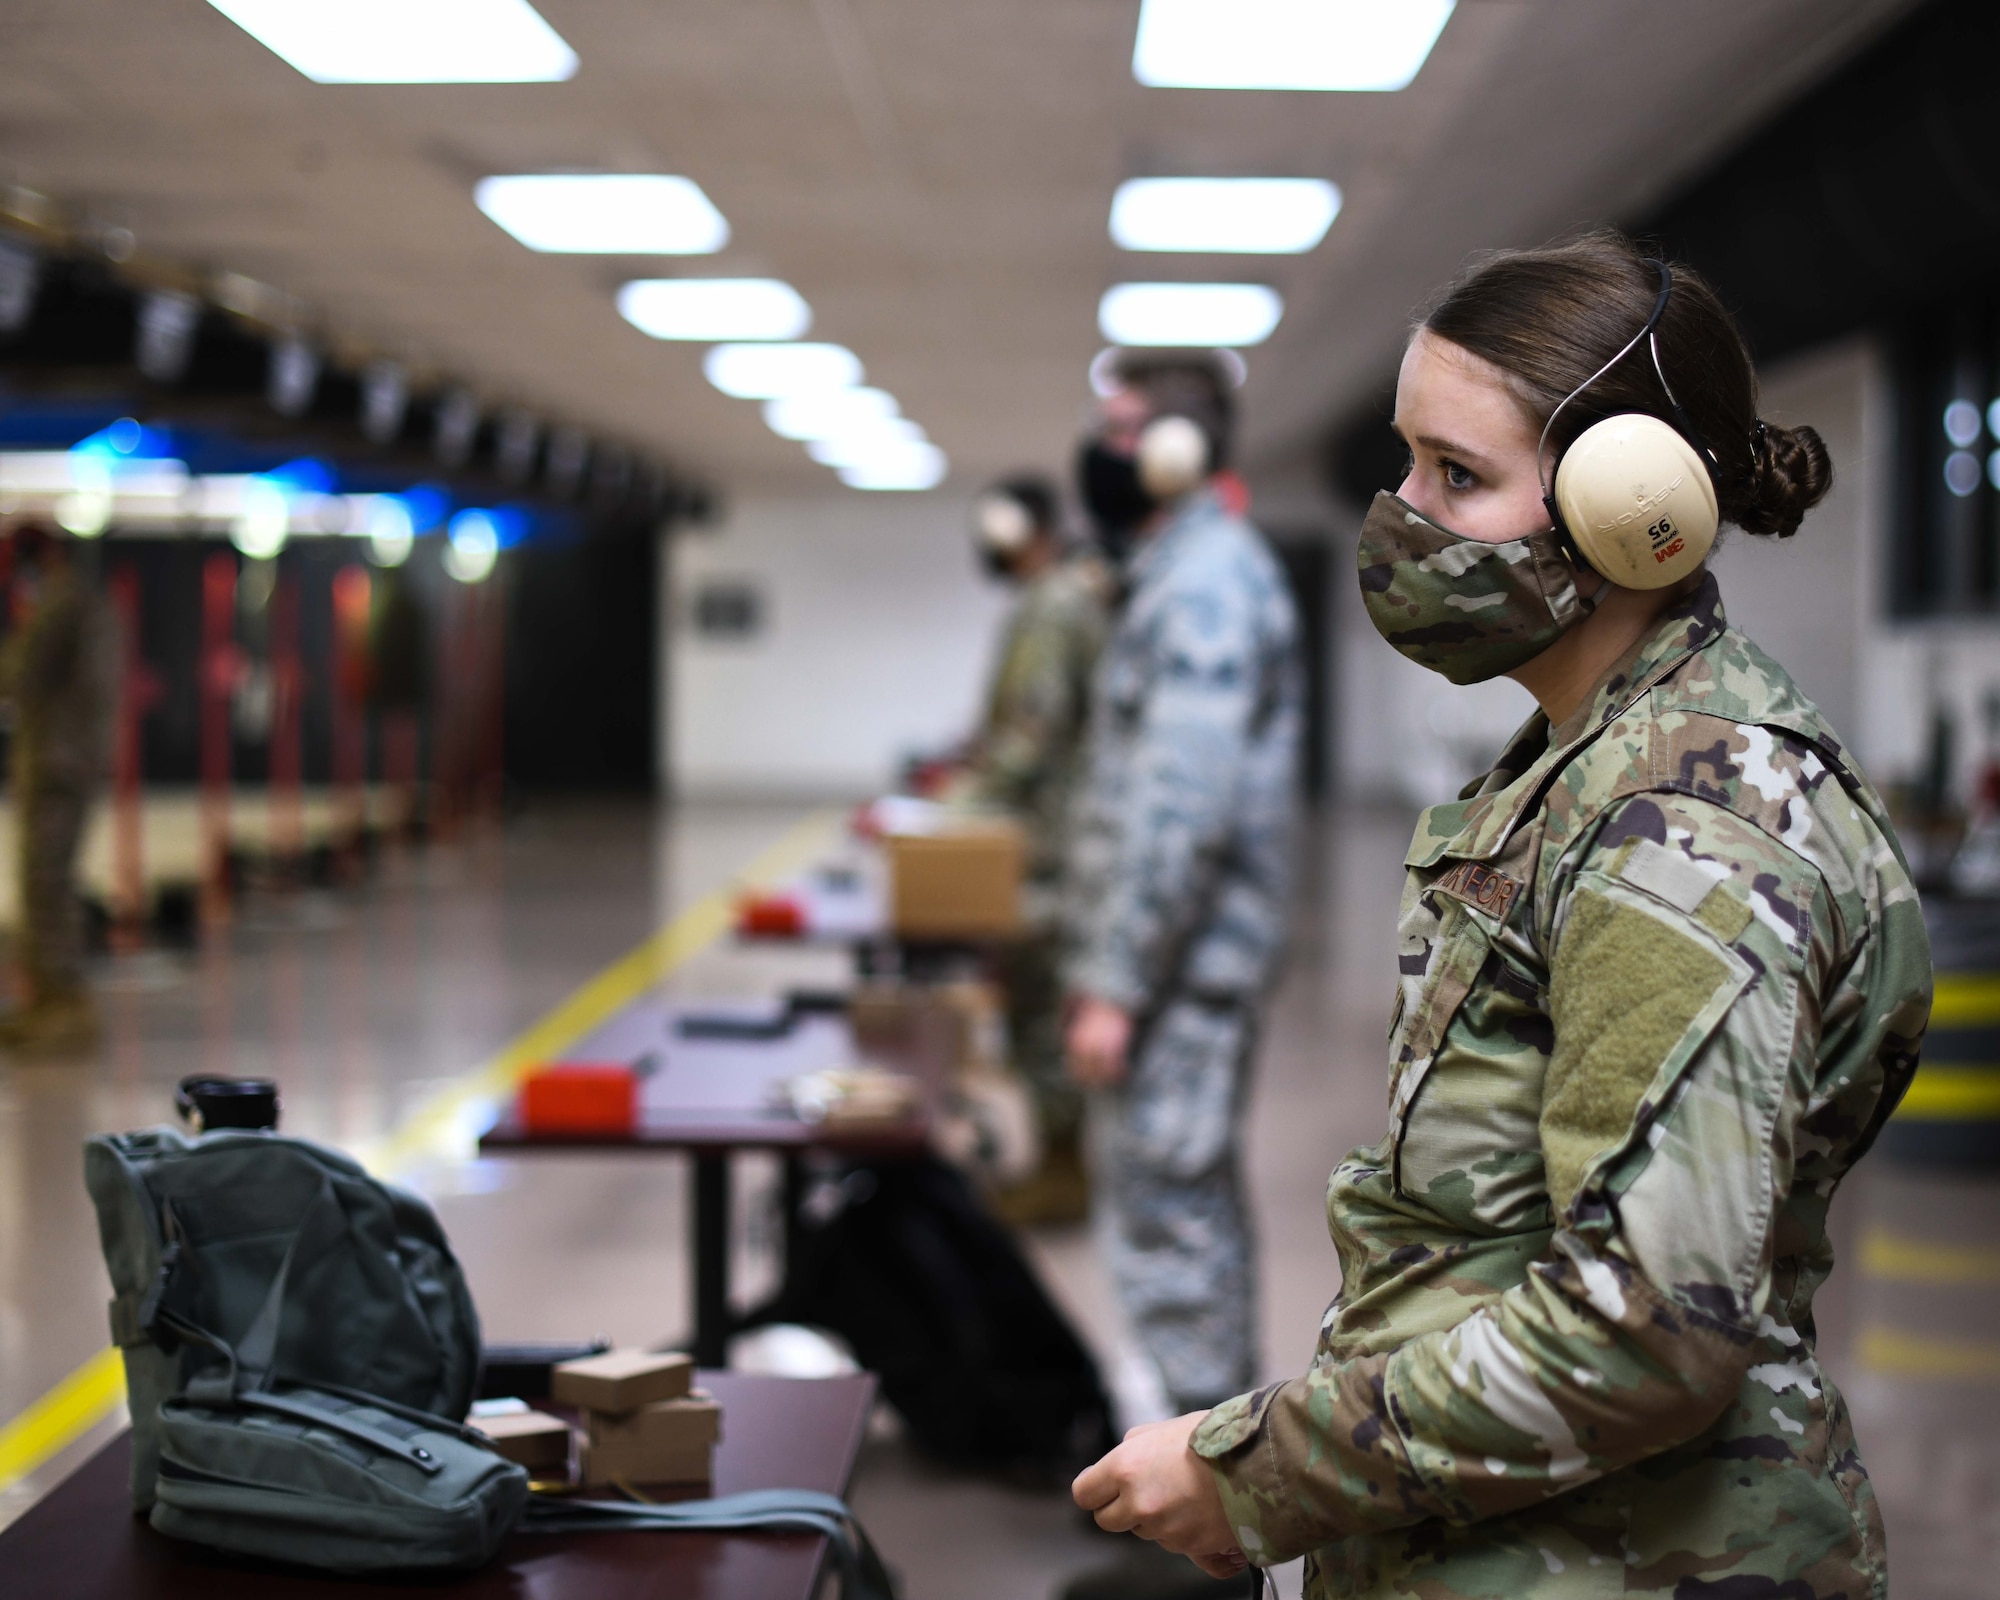 Airman First Class Gabriella Waple, a medical lab specialist from the 910th Medical Squadron, awaits the order to approach her weapon, August 1, 2020, Youngstown Air Reserve Station’s Combat Arms Training and Maintenance firing range. Sixteen medical professionals fired 100 rounds down range during their refresher training.